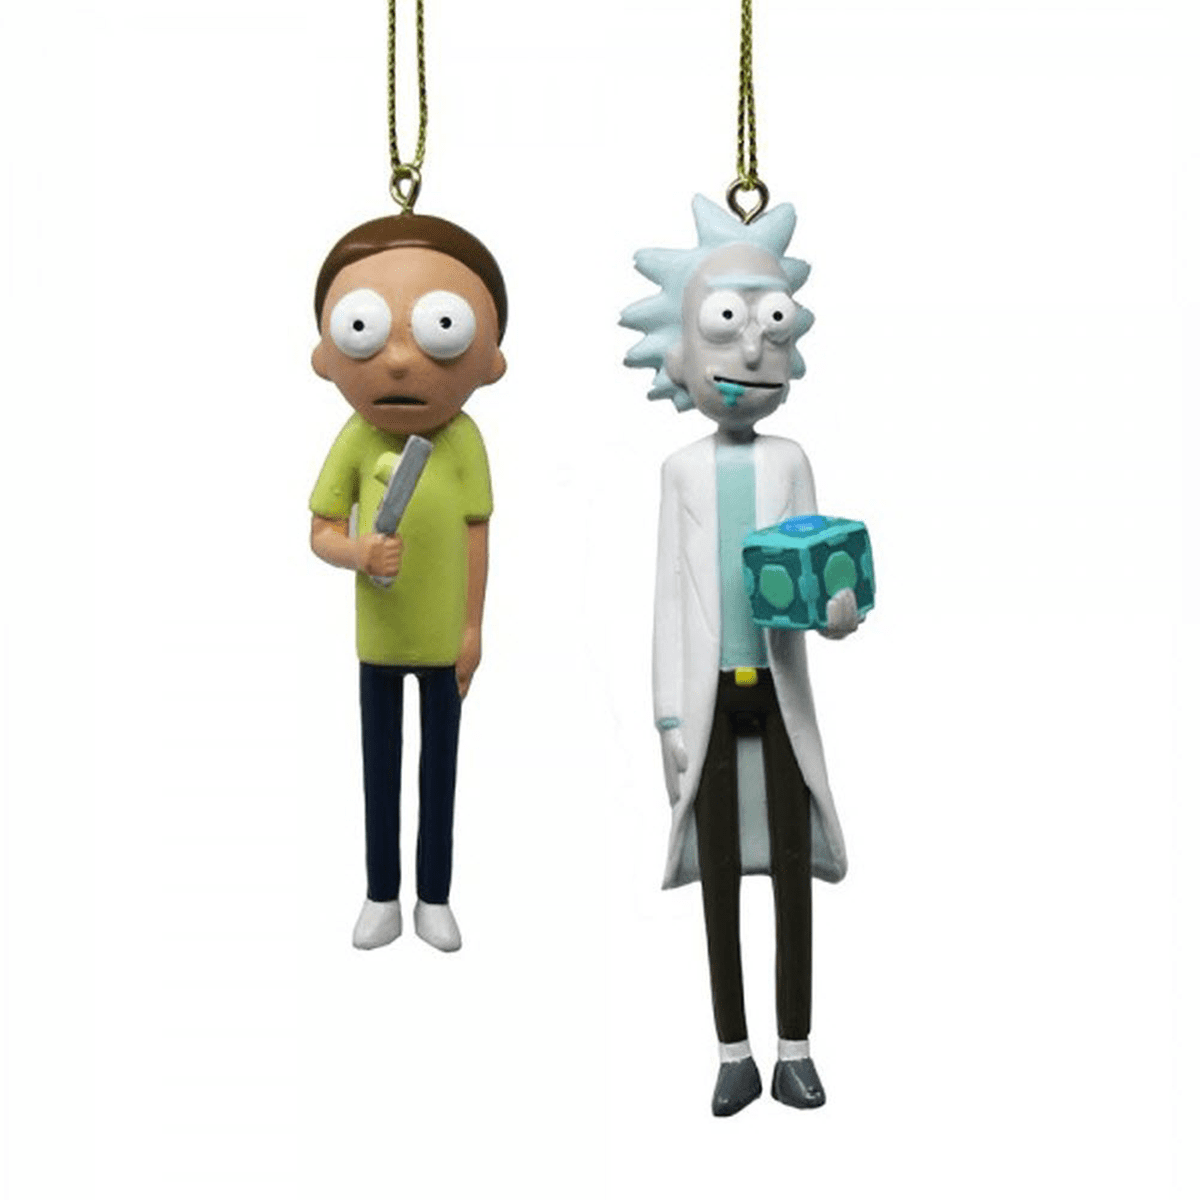 1x Morty Bauble Handmade Inspired From Rick And Morty Christmas Xmas Decoration 